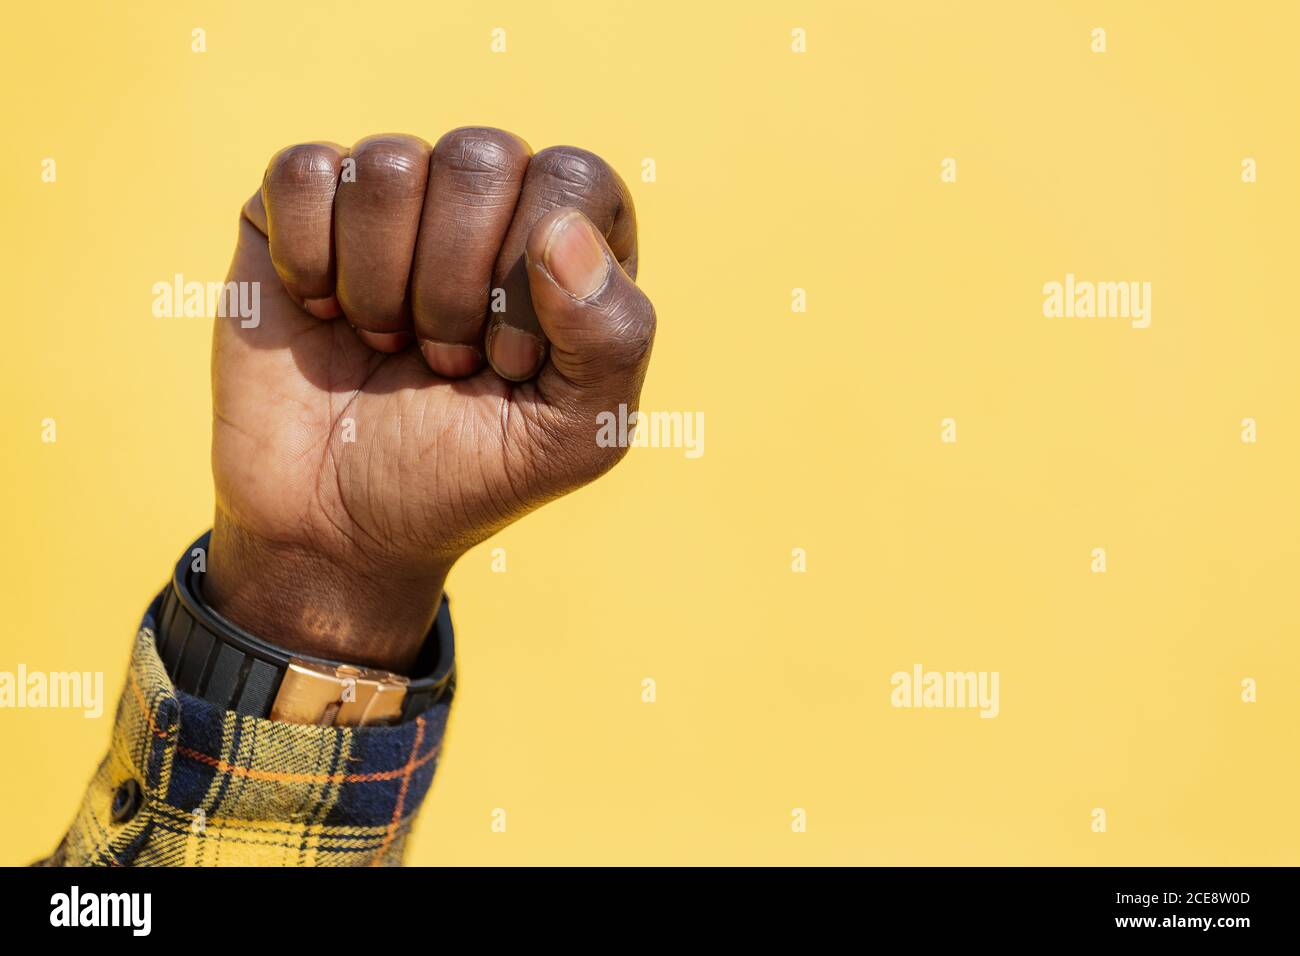 raised fist of a black man on an intense yellow background, concept of human rights struggle and lifestyle, copy space for text Stock Photo